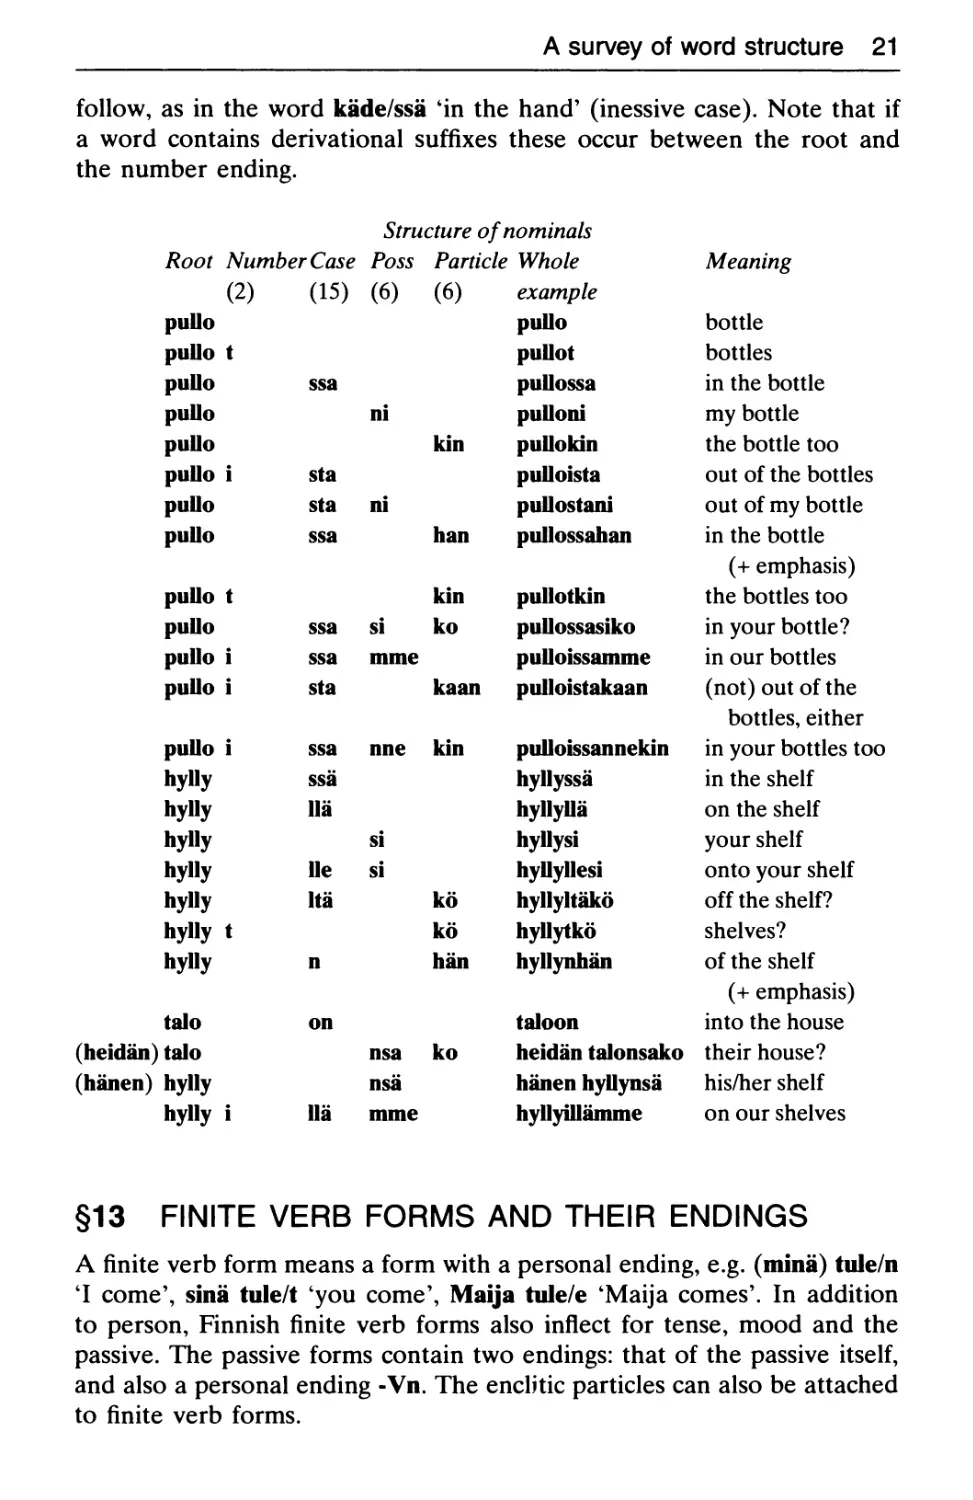 §13 Finite verb forms and their endings